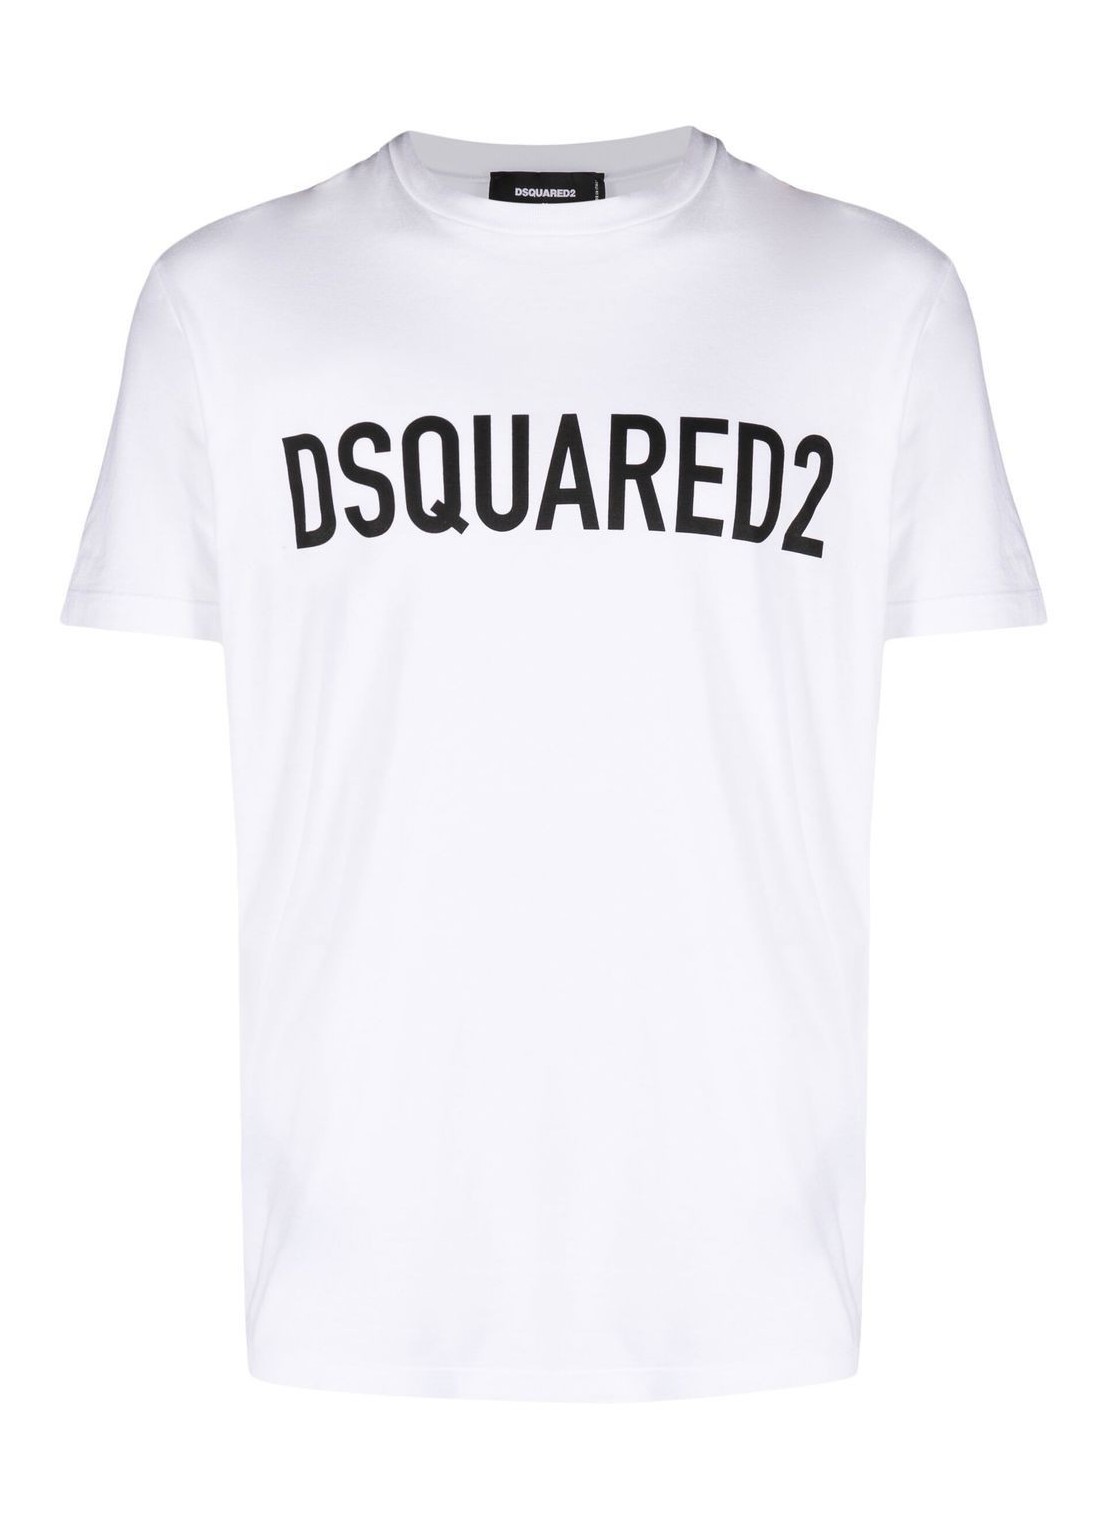 dsquared dsquared2 cool tee - s74gd1126s24321 100 Talla XL